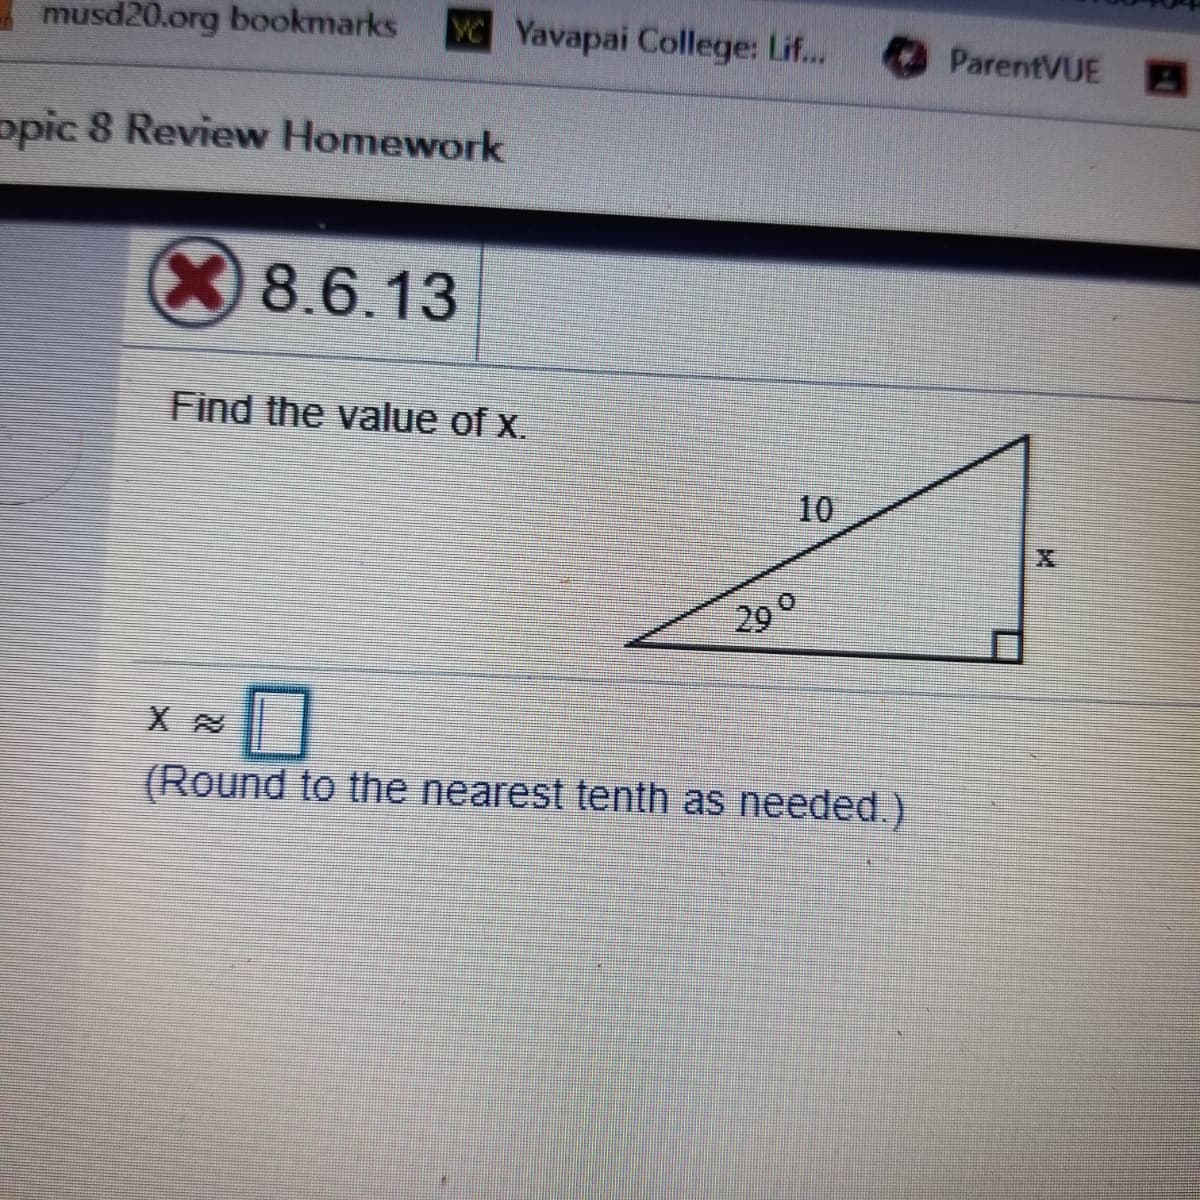 musd20.org bookmarks
VC Yavapai College: Lif...
ParentVUE
opic 8 Review Homework
8.6.13
Find the value of x.
10
20
(Round to the nearest tenth as needed.)
